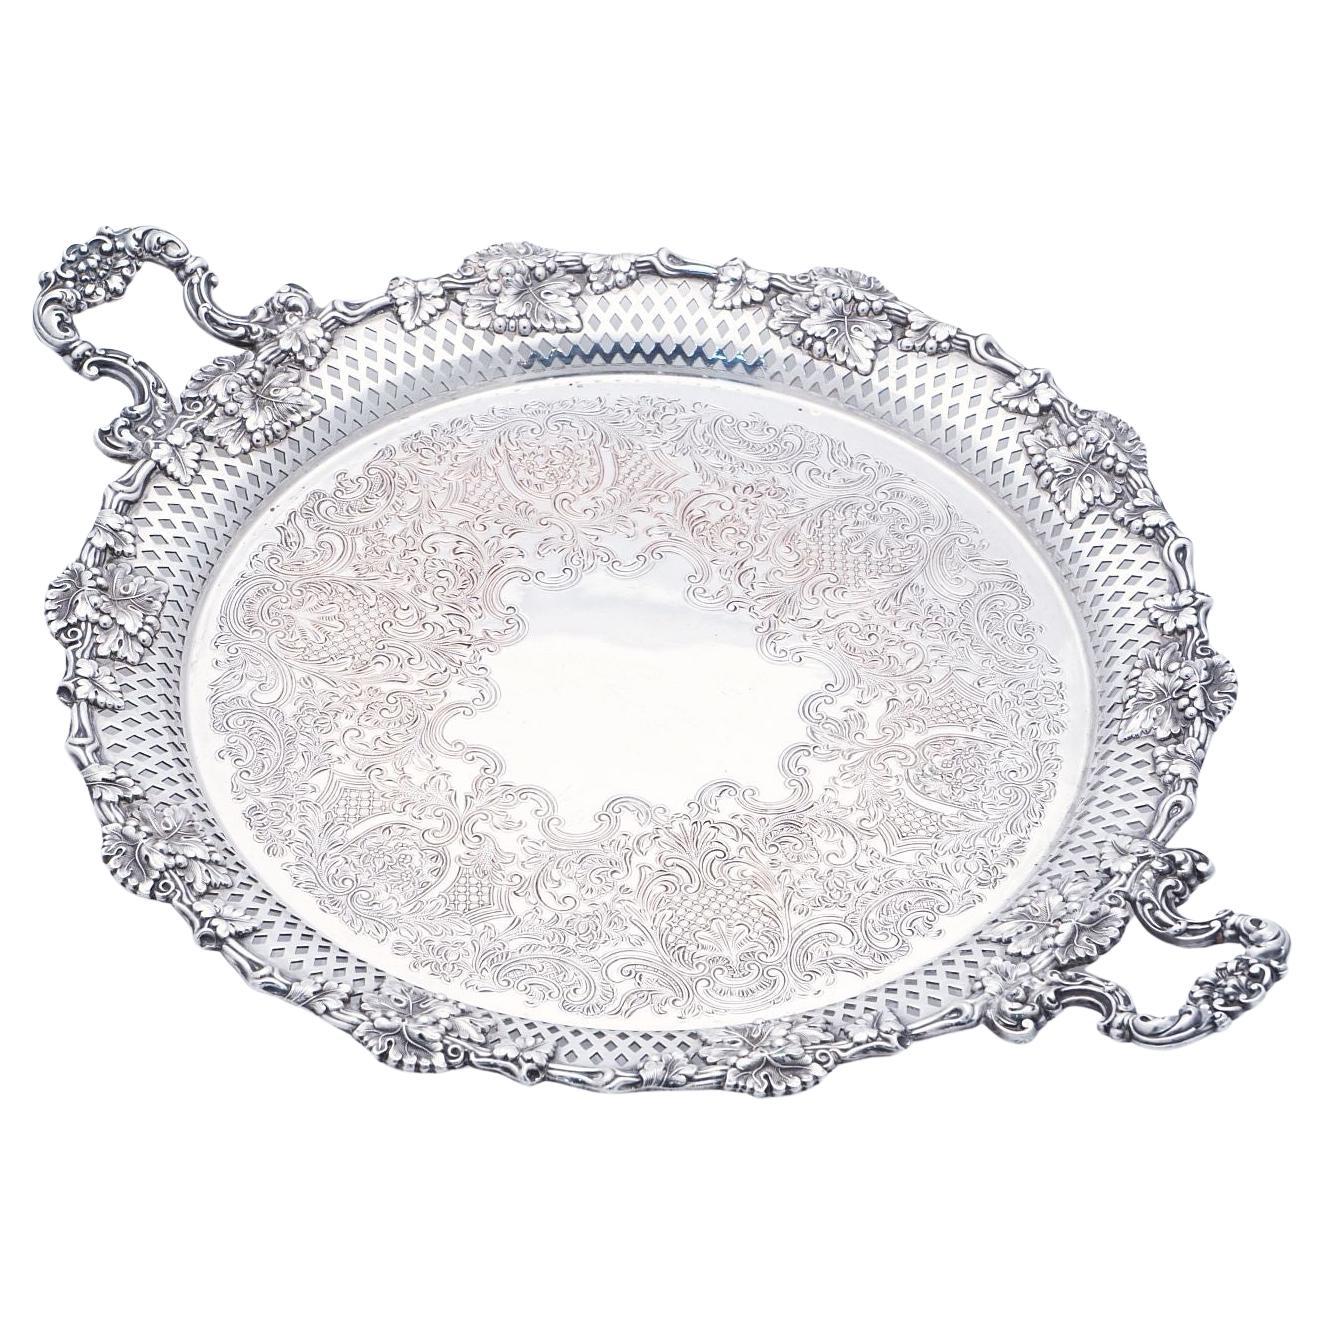  Large English Silver Round Serving or Drinks Tray with Handles